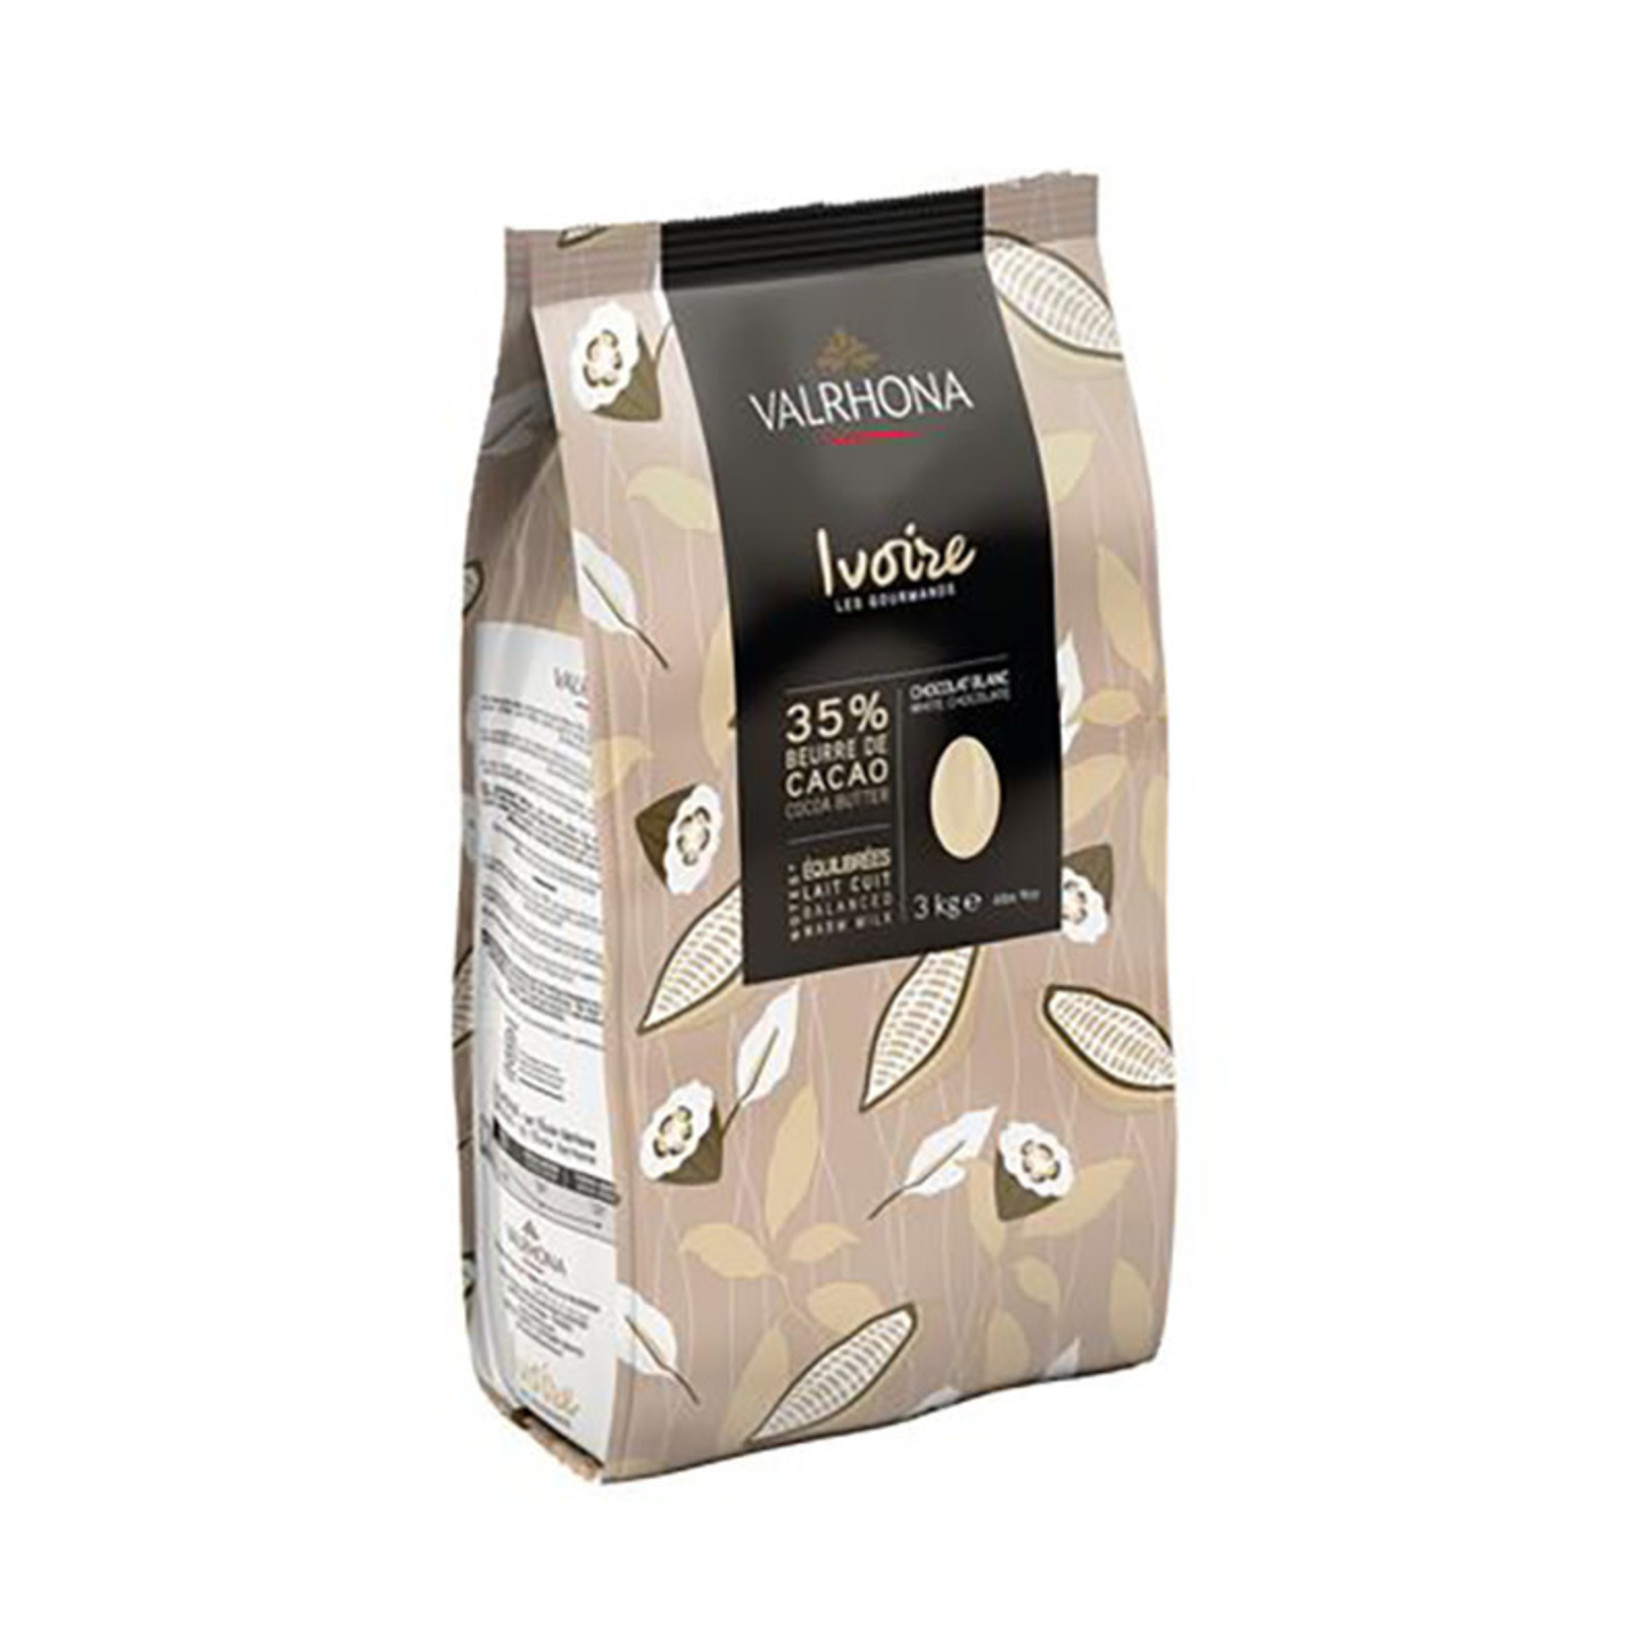 Valrhona Ivoire 35% White Couverture Chocolate Feves